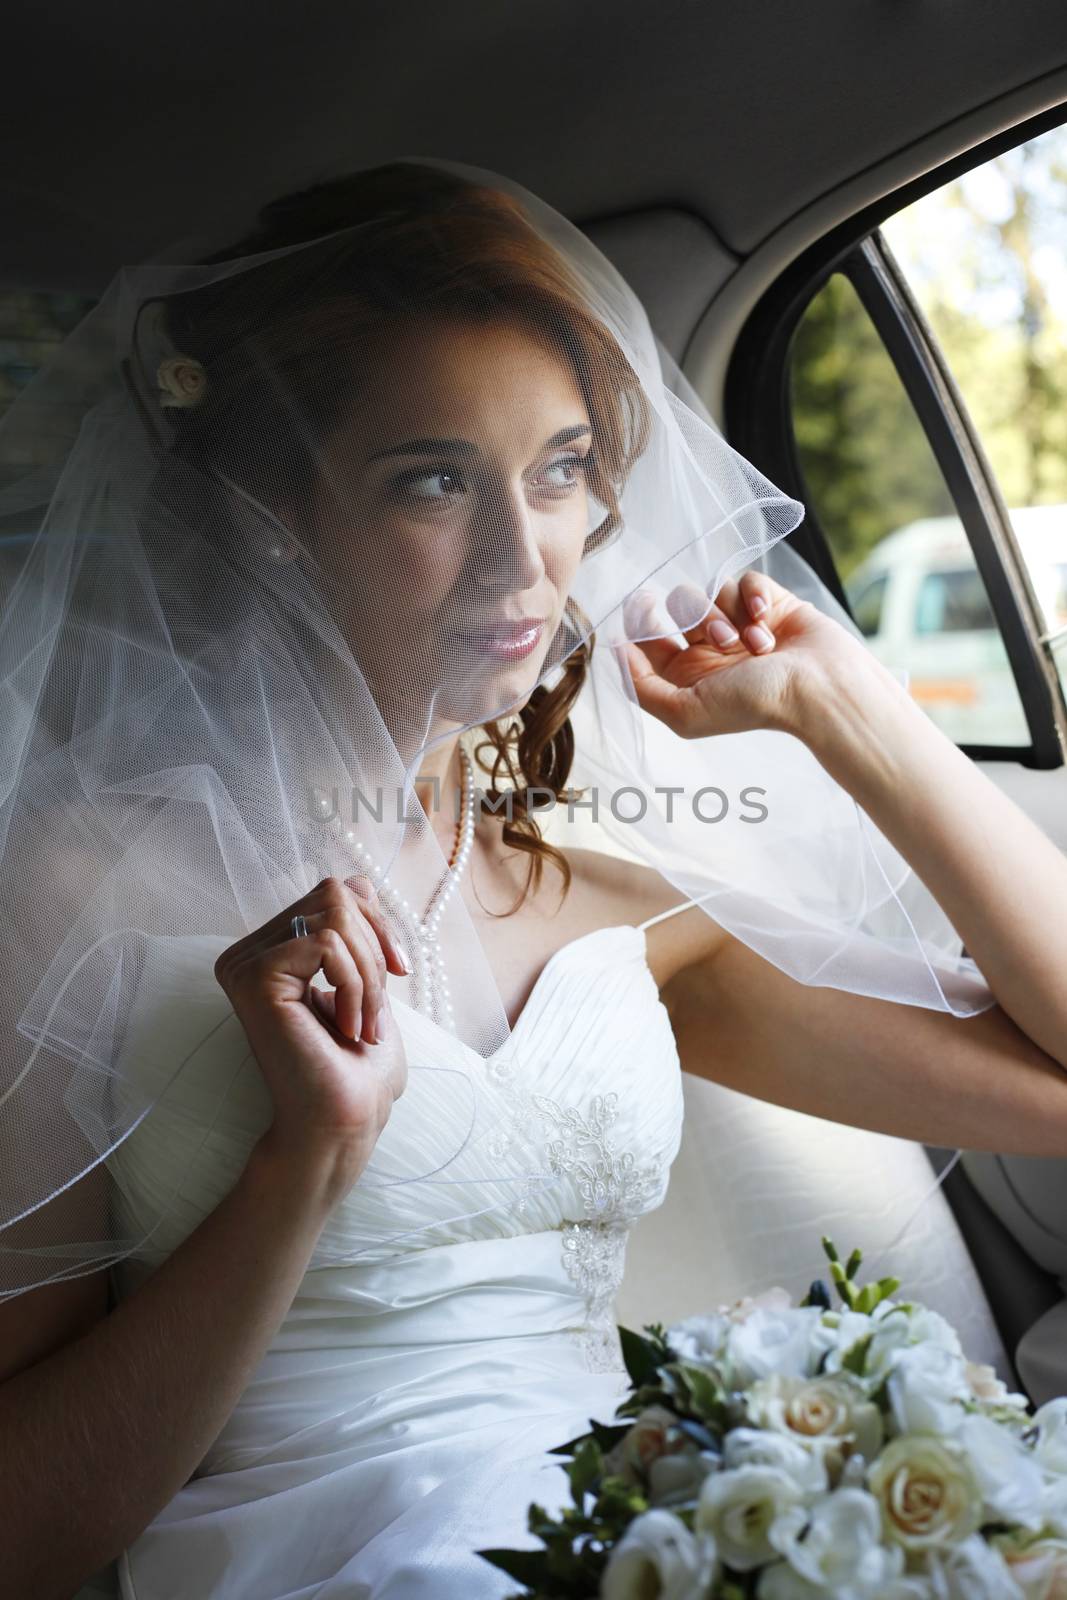 Beautiful bride with wedding bouquet in white car